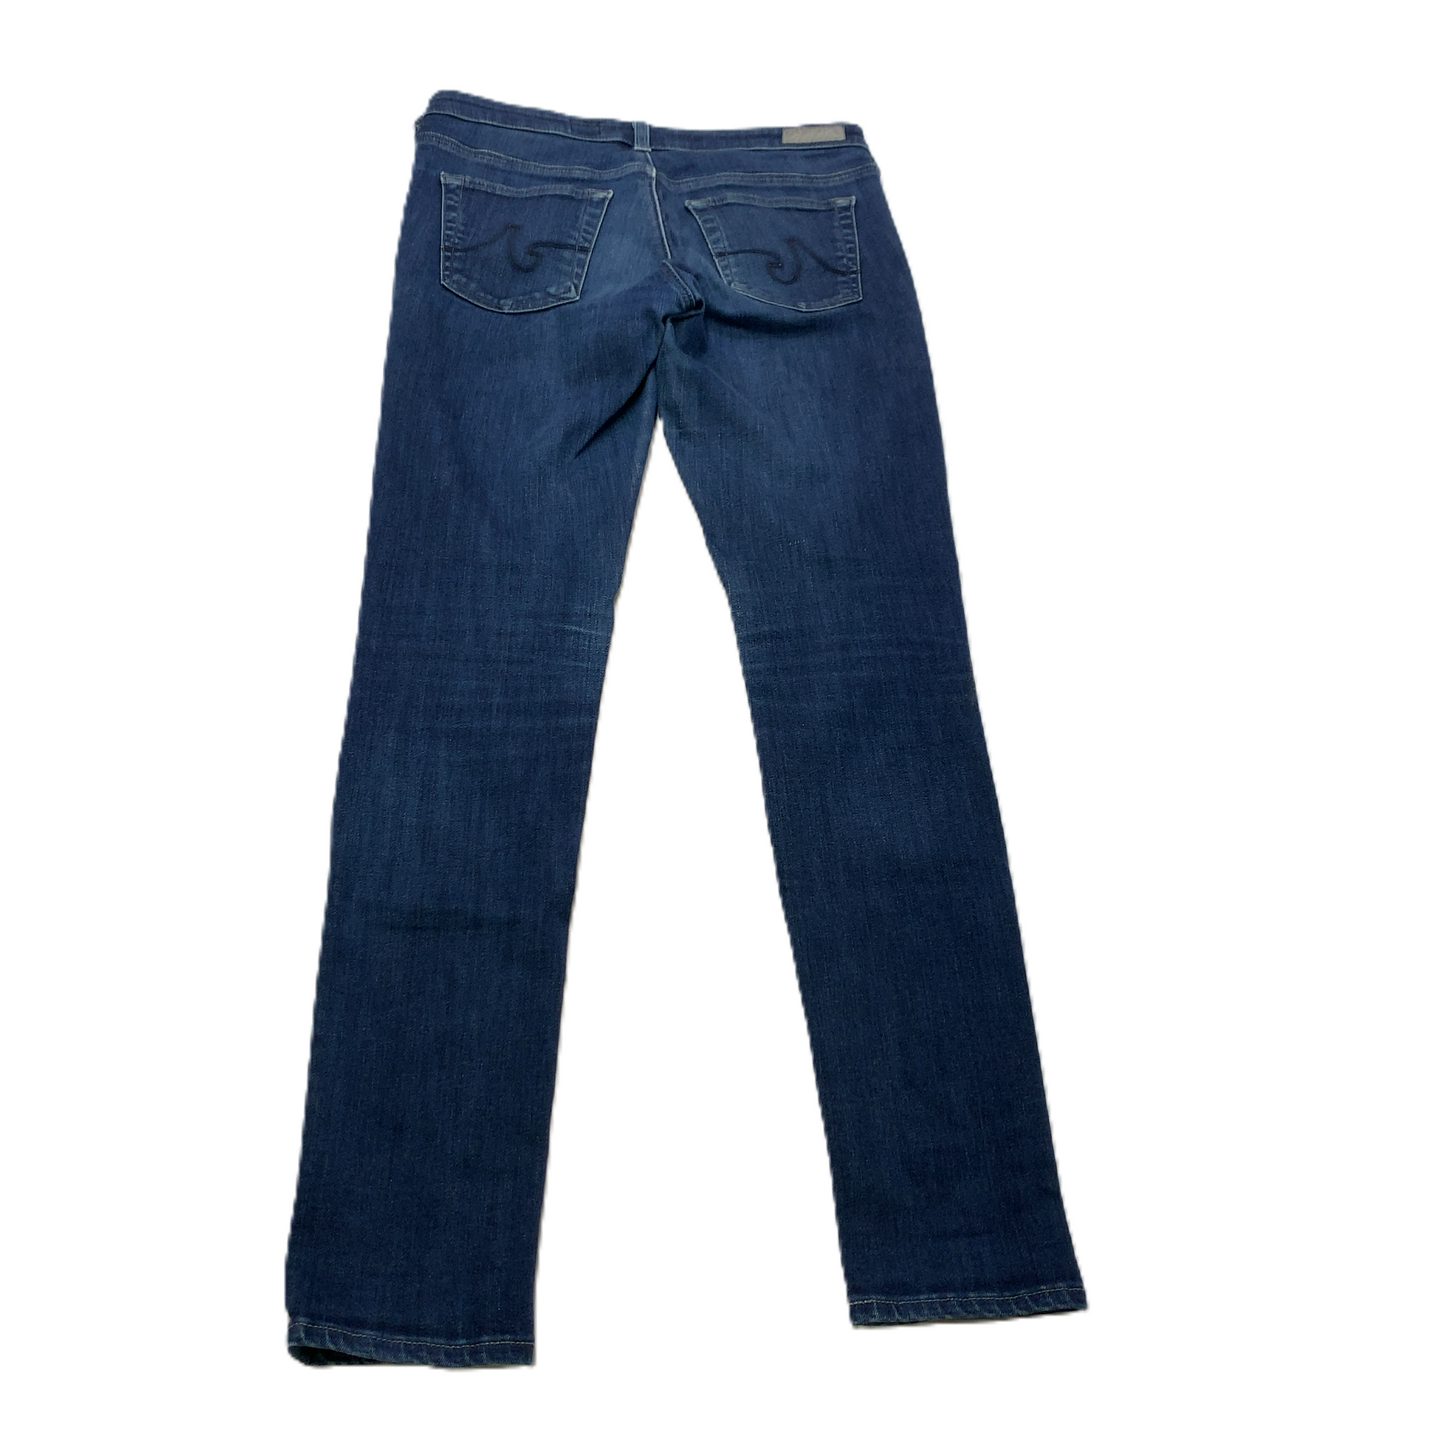 Jeans Designer By Adriano Goldschmied  Size: 10